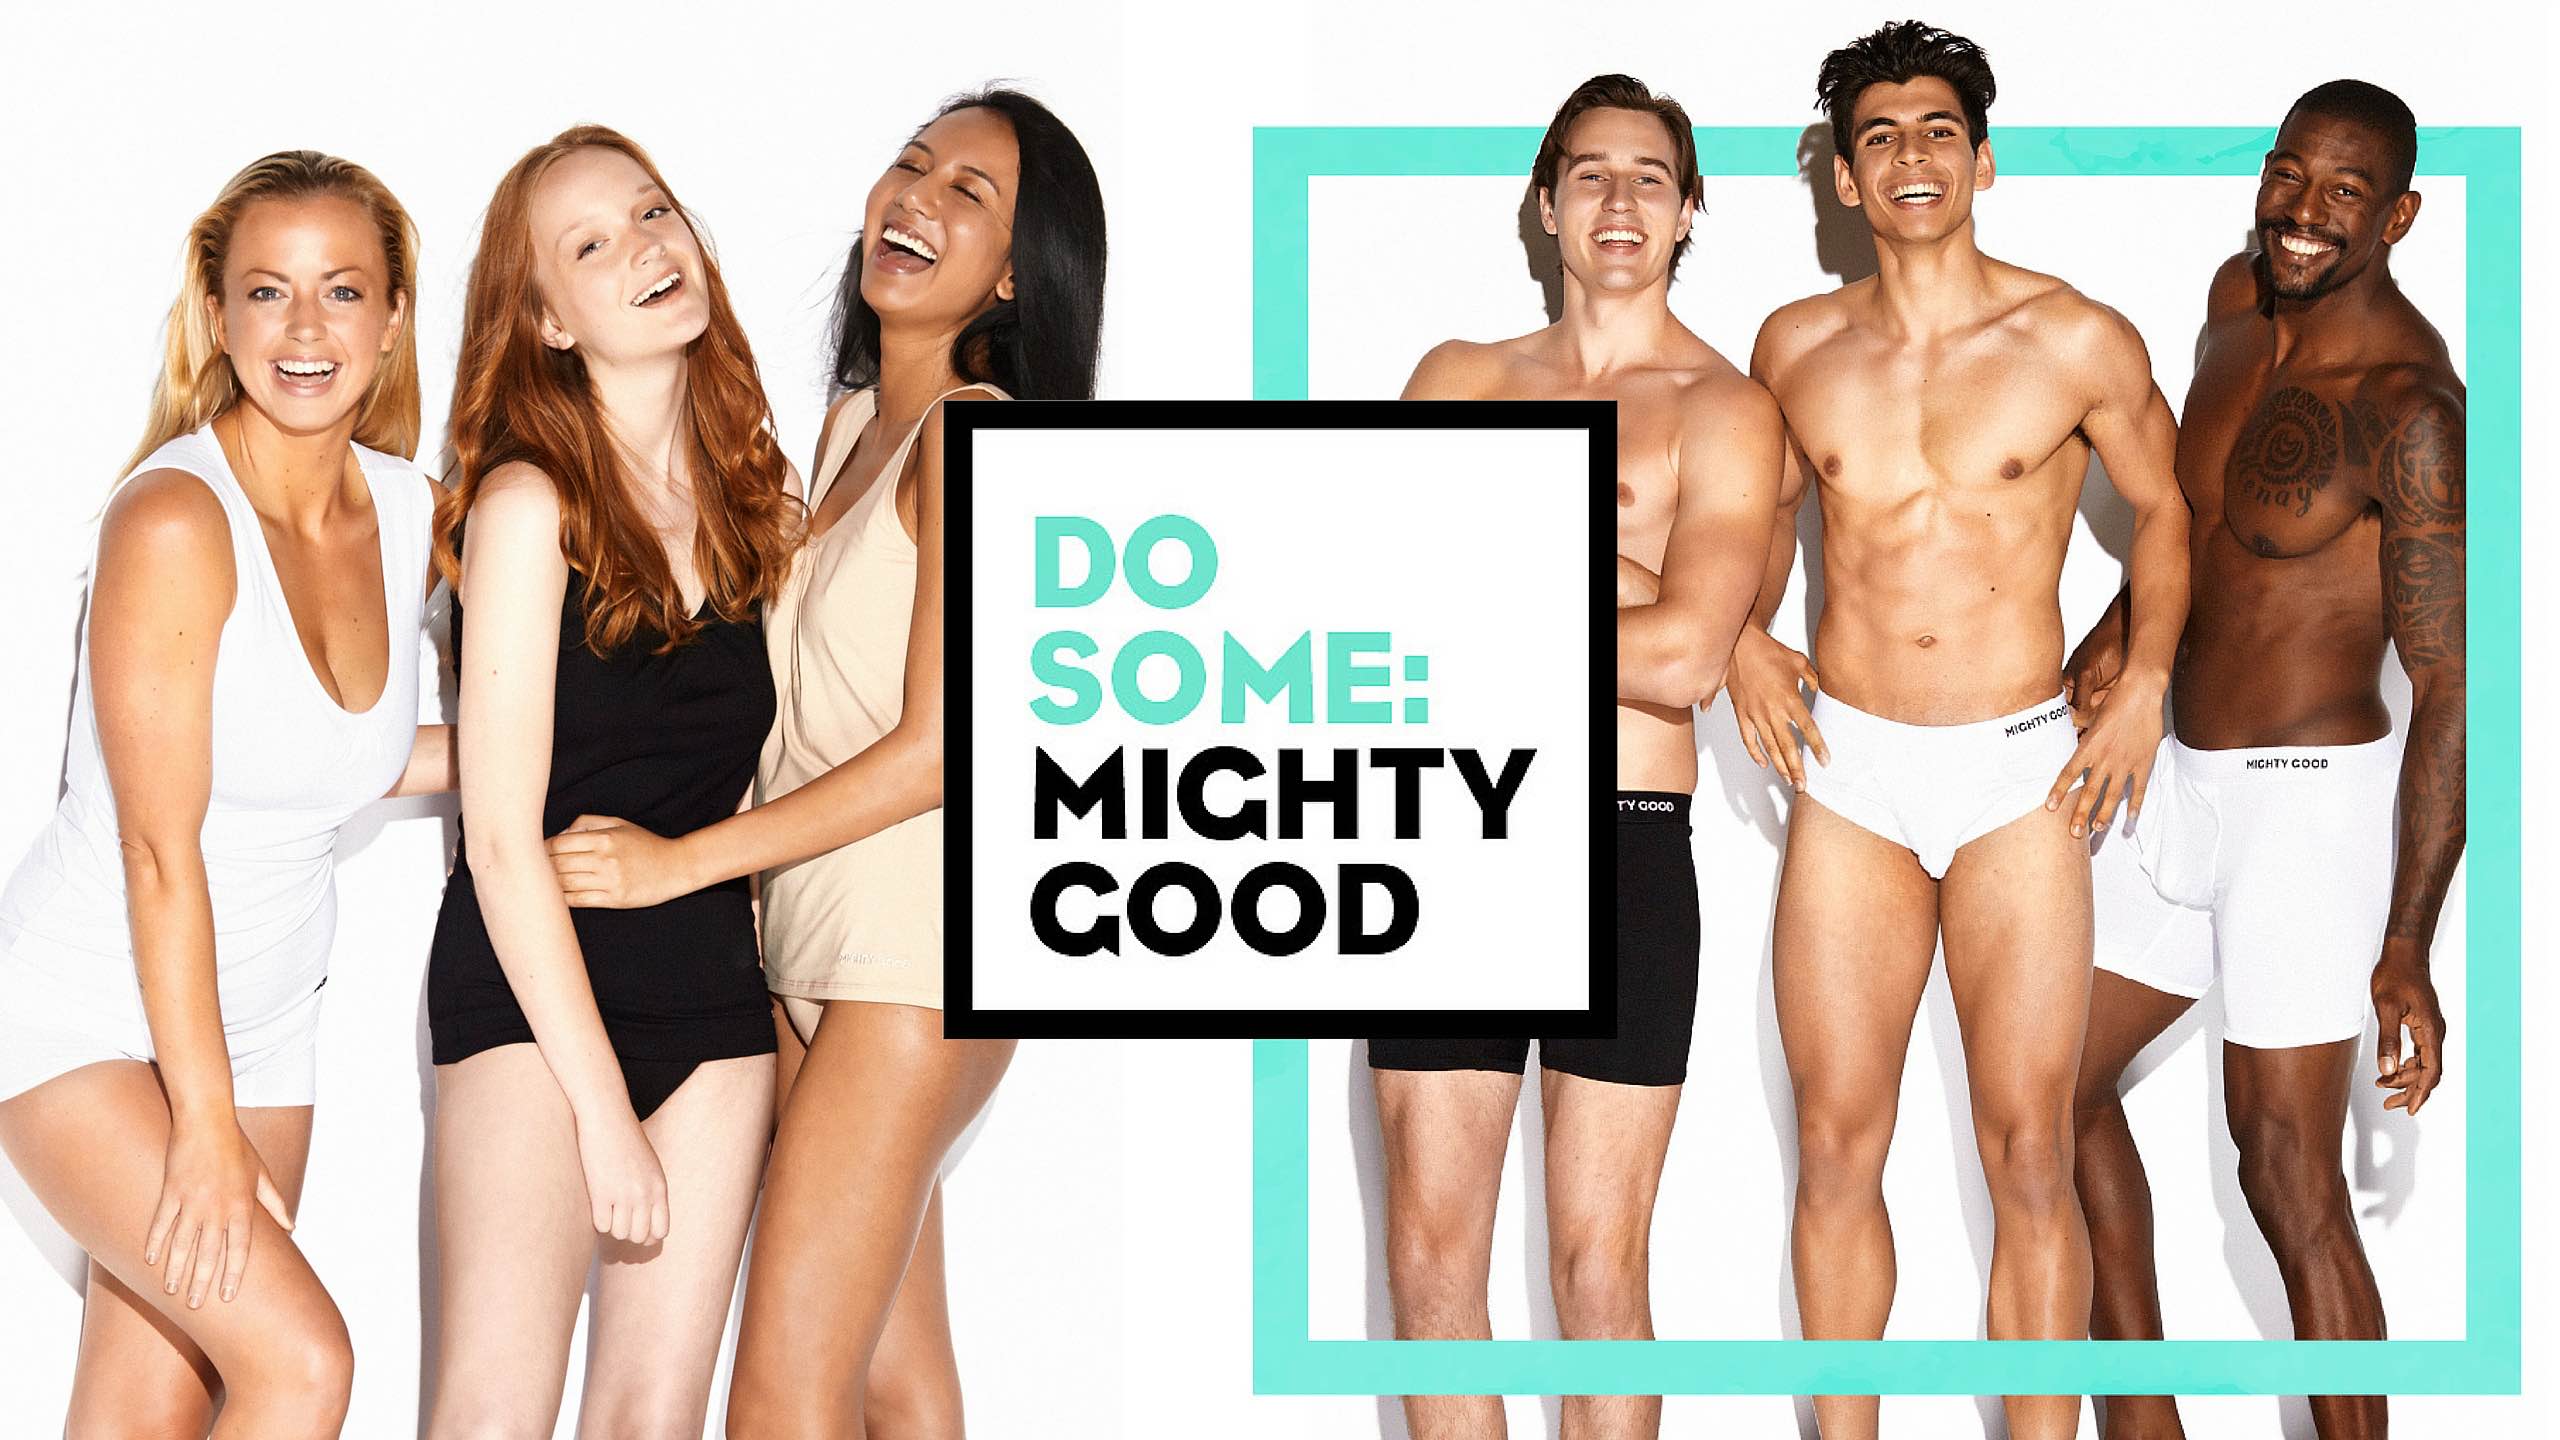 The people's choice for organic undies. - Wear Pact